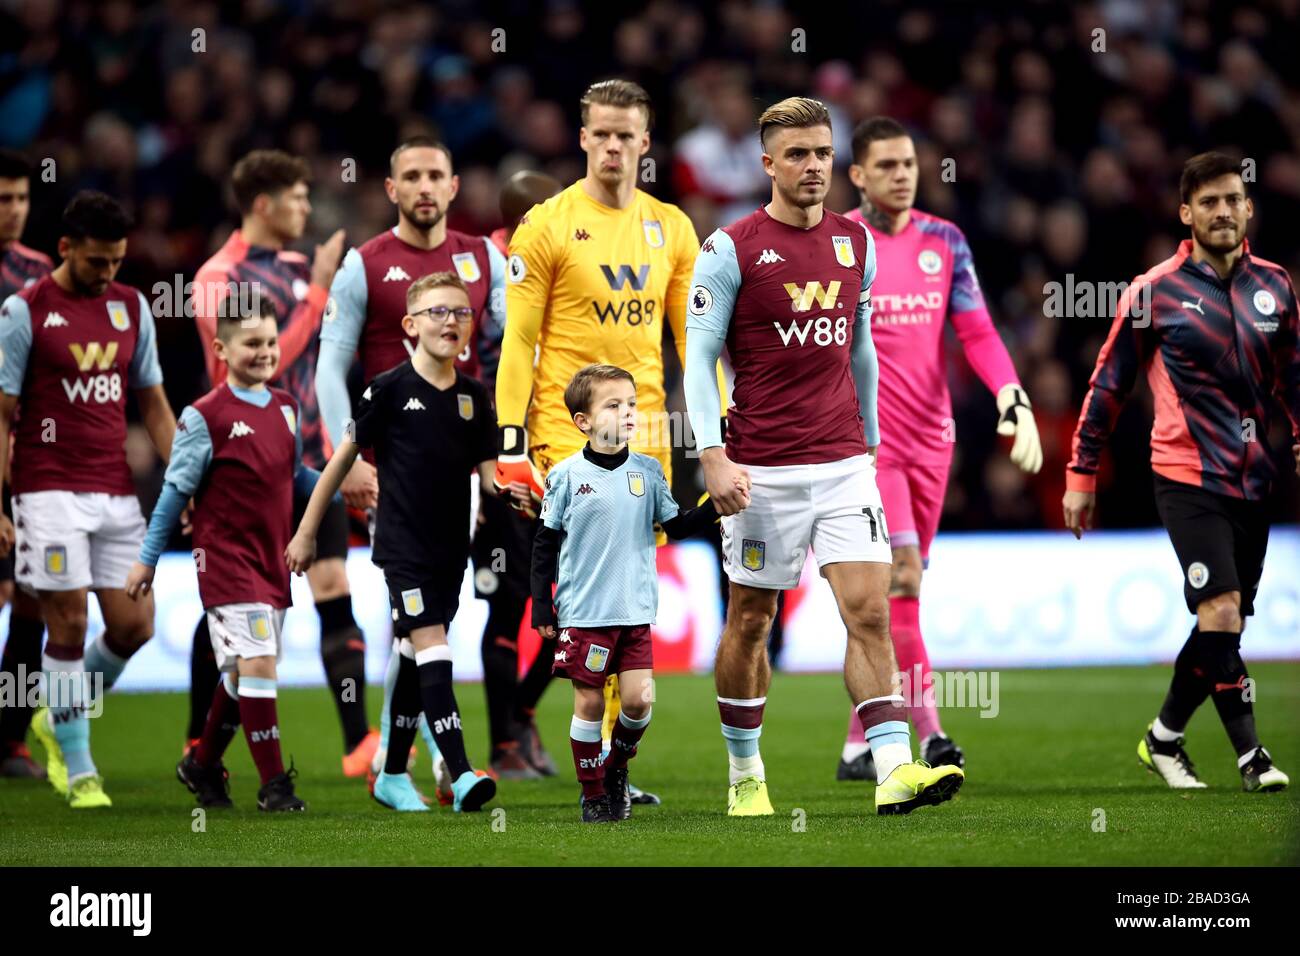 Aston Villa's captain Jack Grealish leads out his team before the match Stock Photo